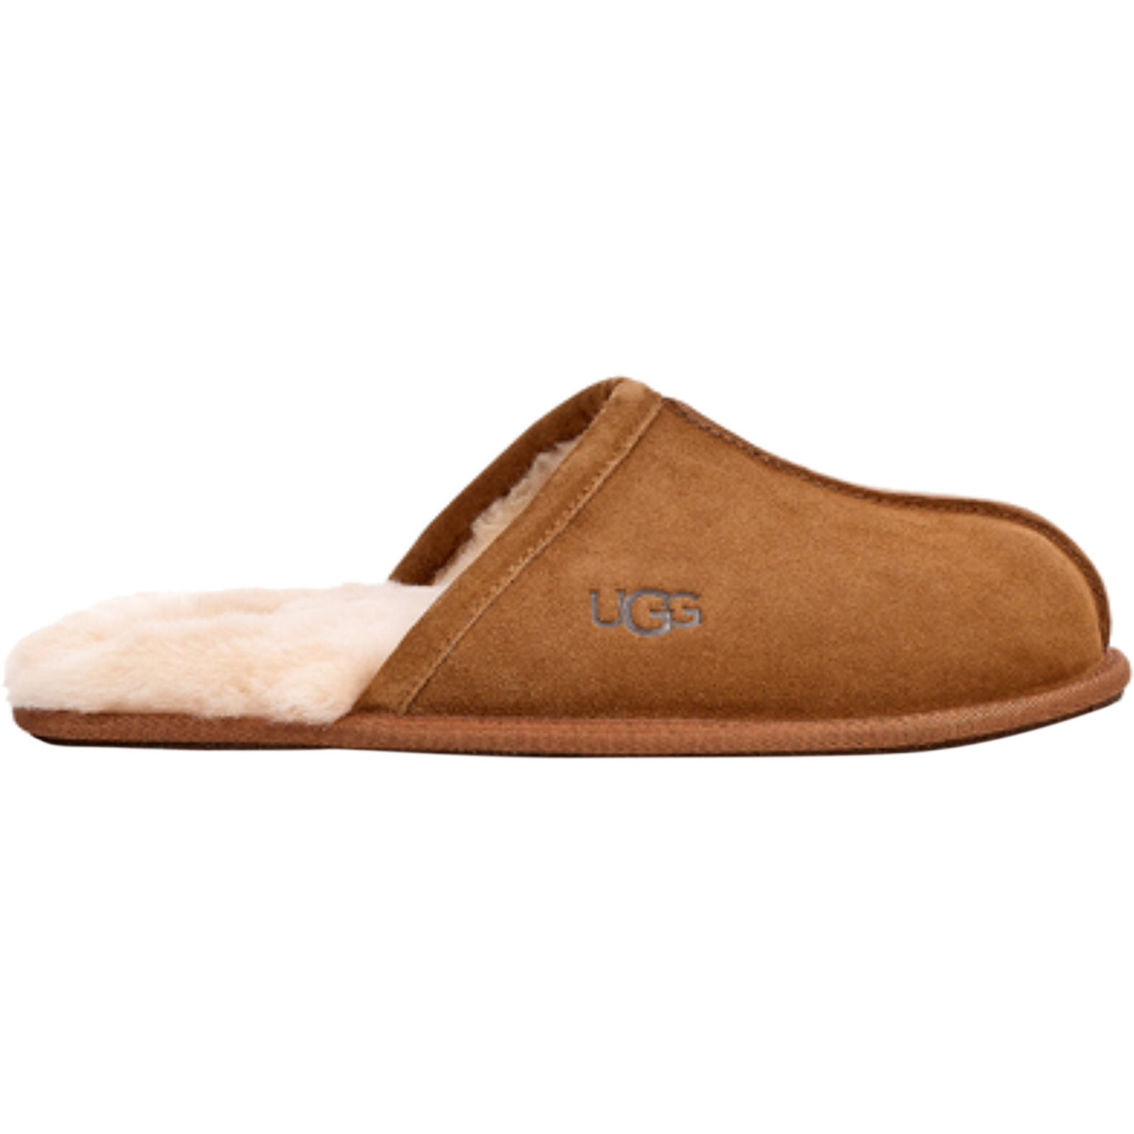 Ugg Men's Scuff Slippers | Slippers | Shoes | Shop The Exchange